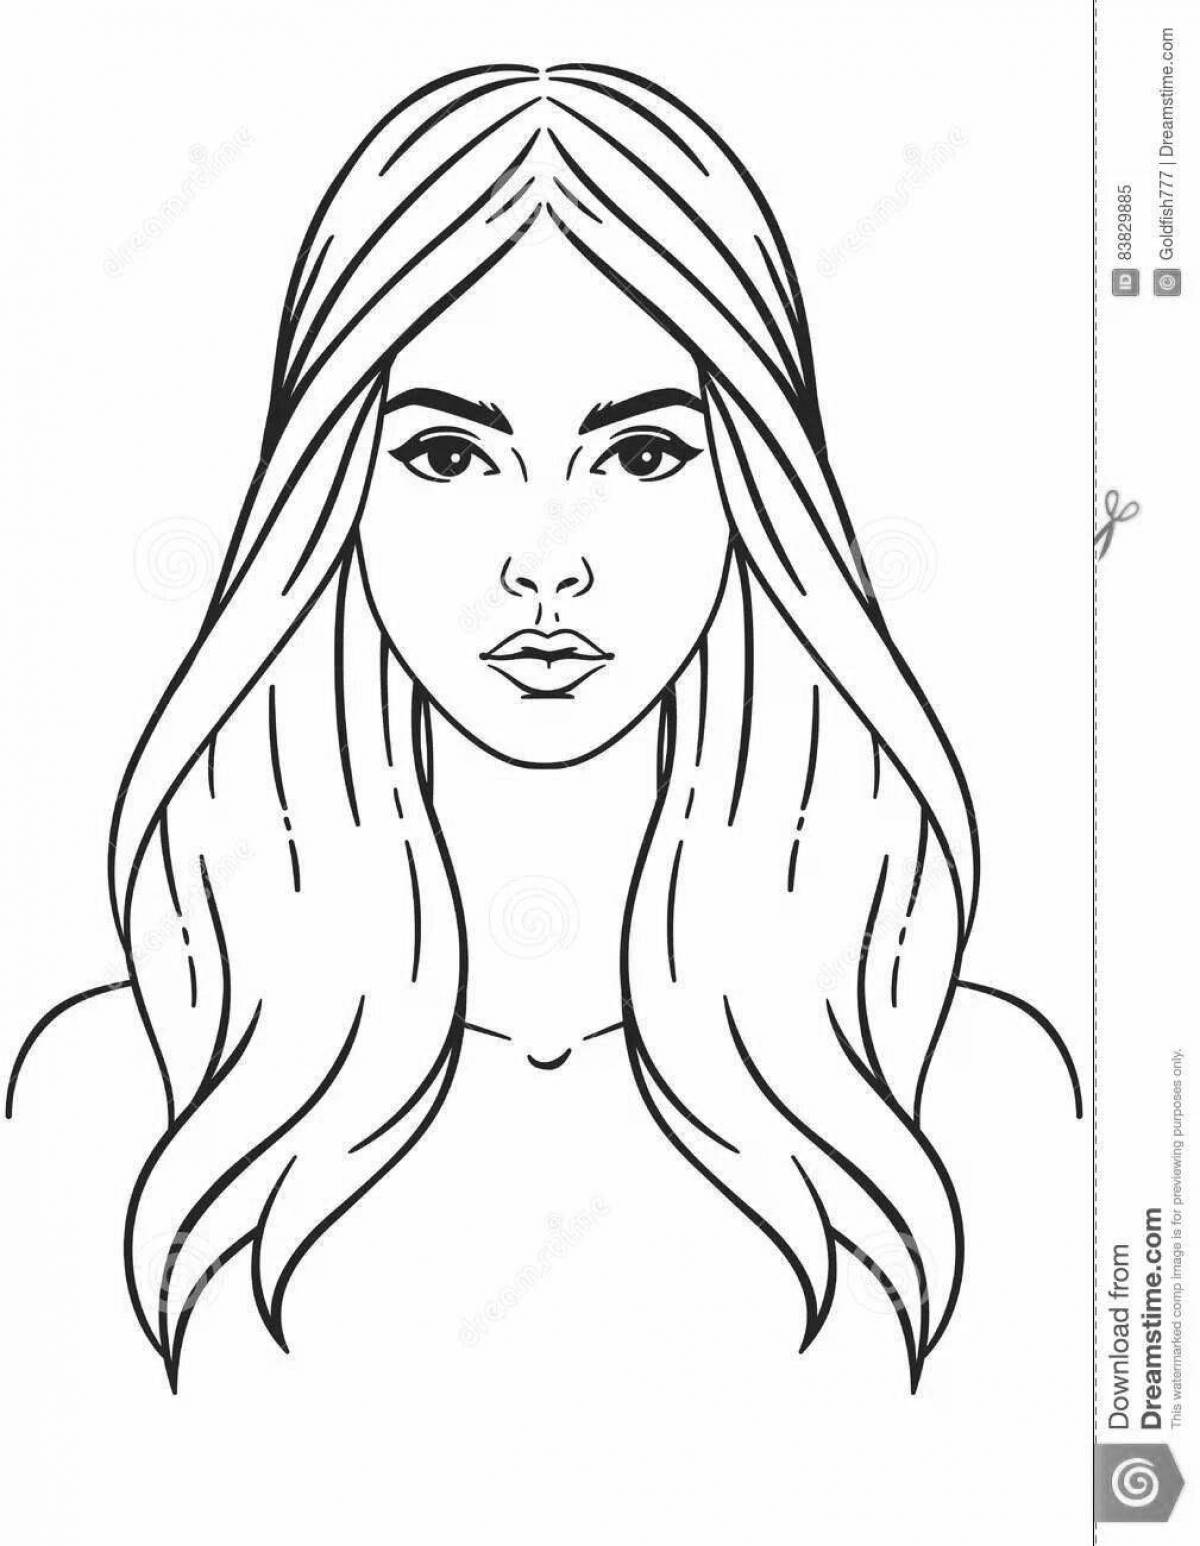 Adorable woman face coloring book for kids